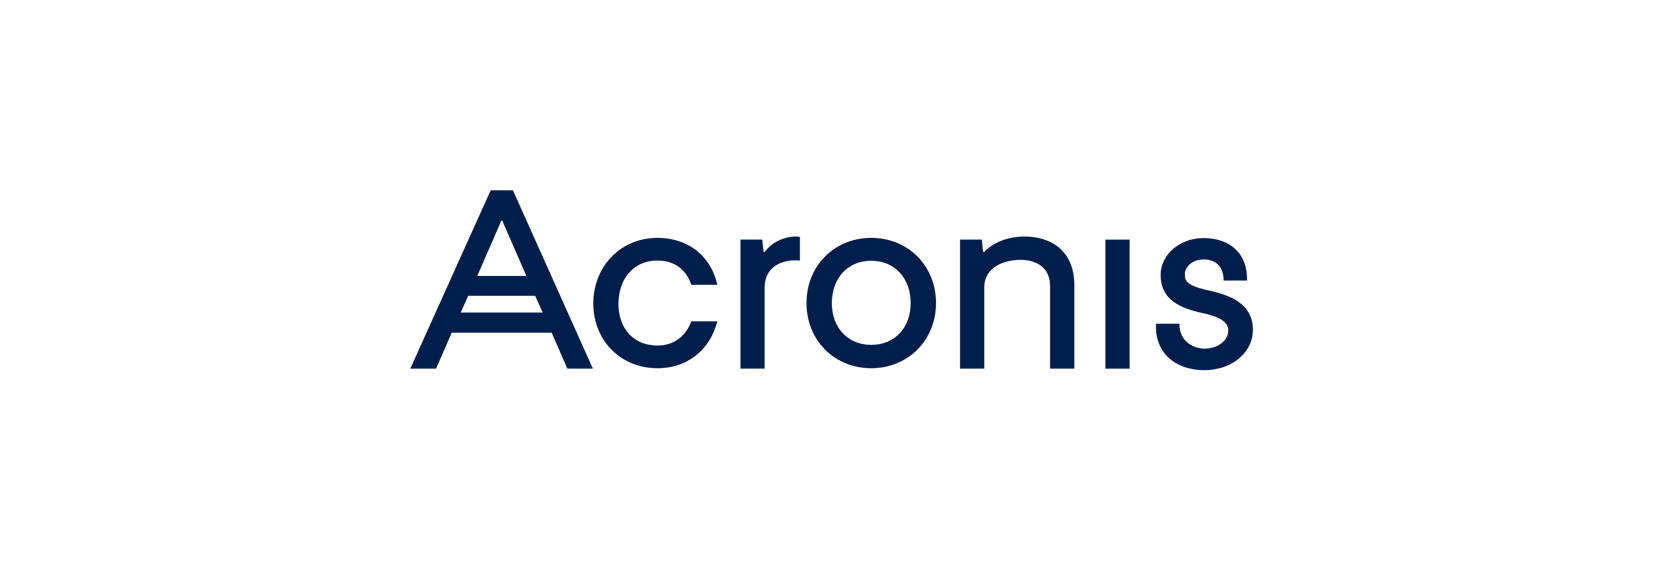 Acronis Makes Cyber Protection All Workloads Available at No-charge